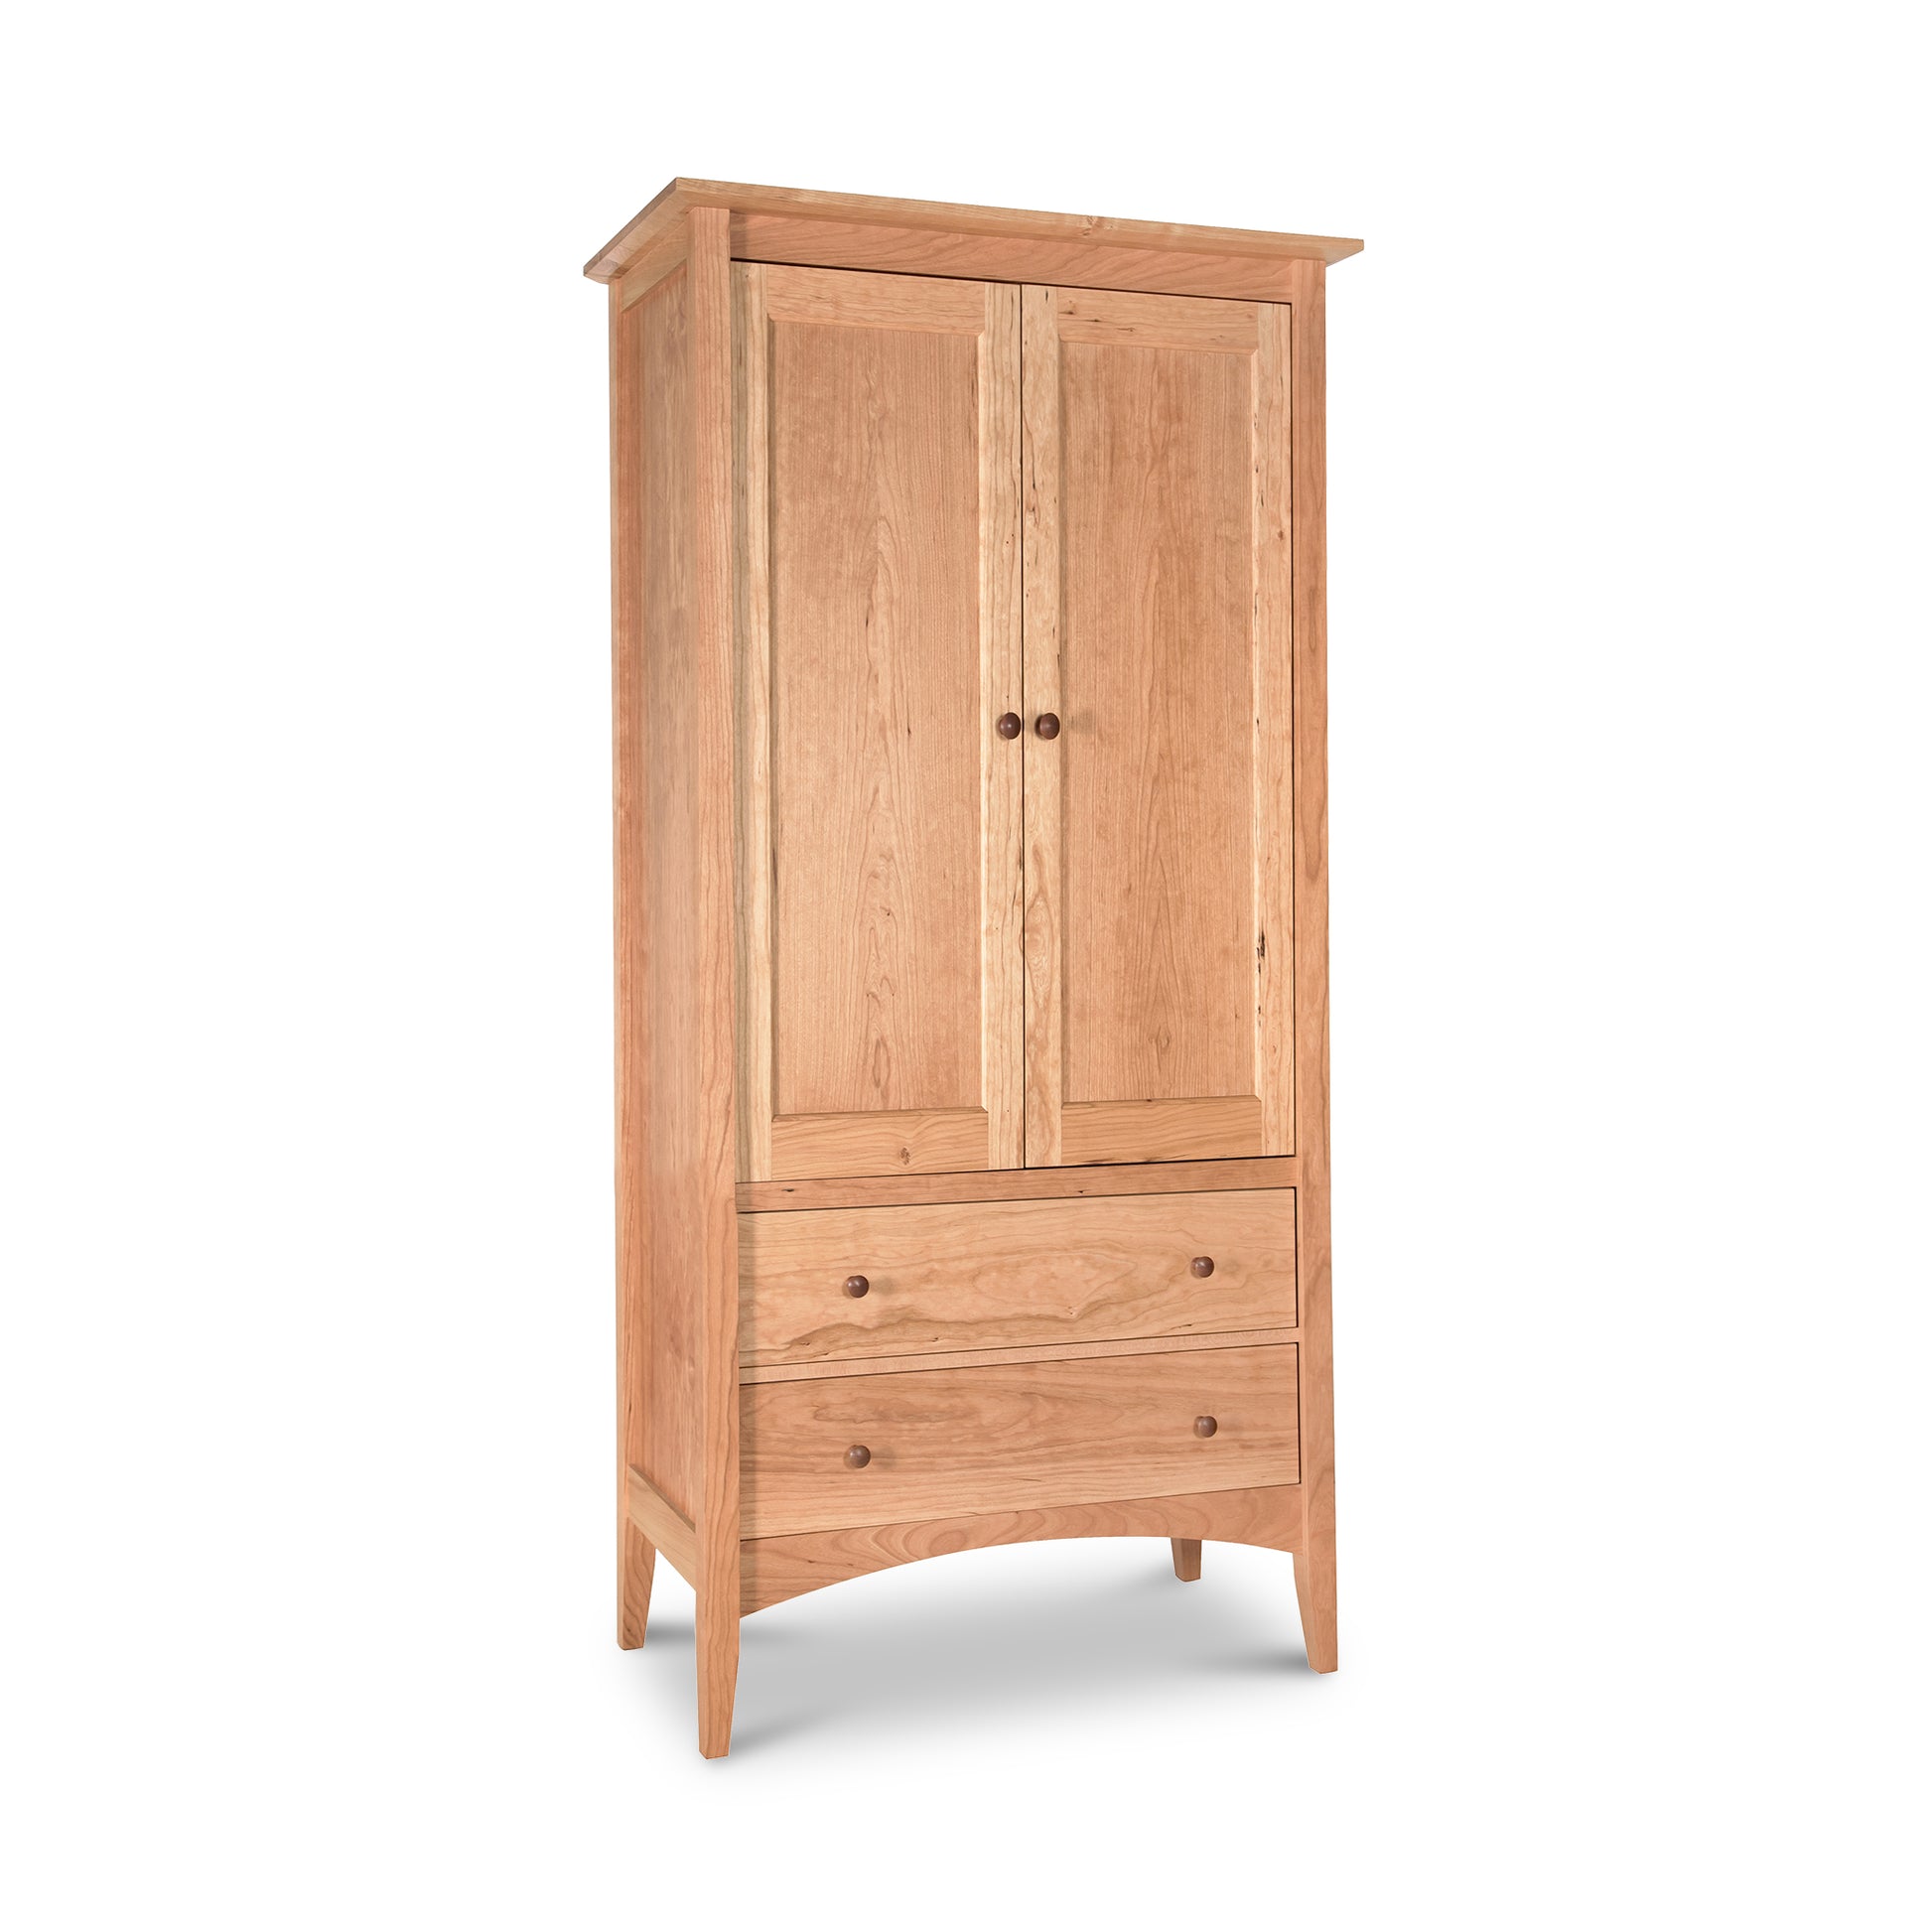 An American-made Maple Corner Woodworks wooden armoire with two drawers, called the American Shaker Armoire.